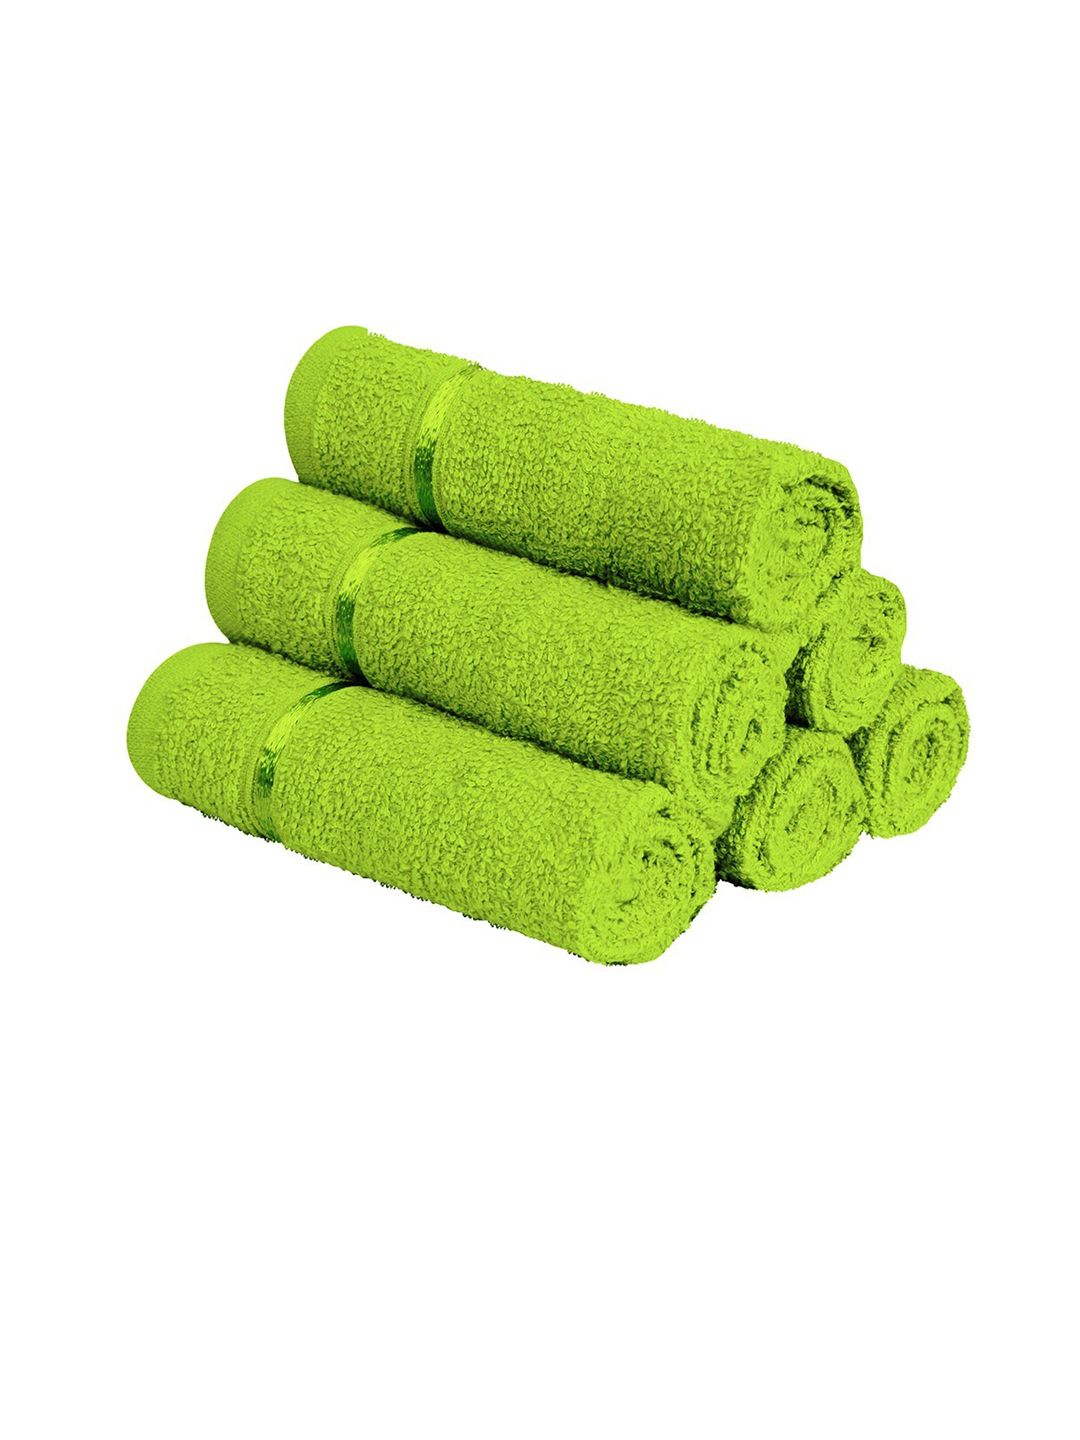 Story@home Set Of 6 Green Solid Pure Cotton 450 GSM Face Towels Price in India